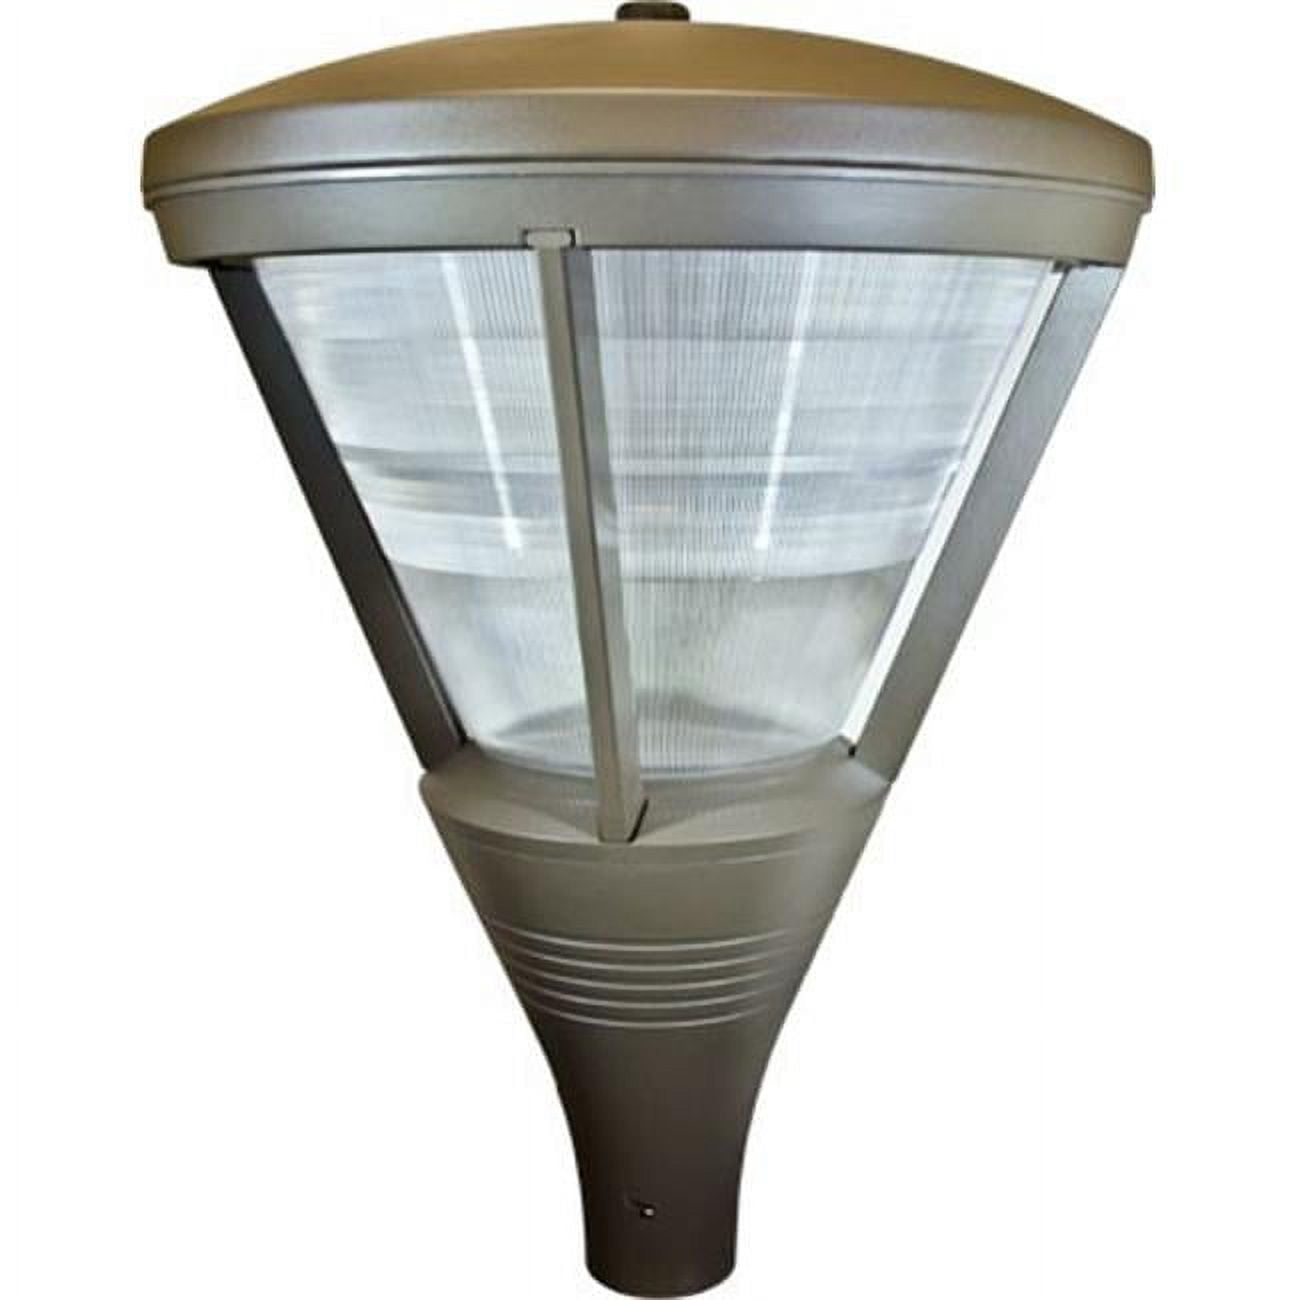 Picture of Dabmar Lighting GM581-BZ Powder Coated Cast Aluminum Architectural Post Top Light Fixture, Bronze - 34.50 x 25.25 x 25.25 in.